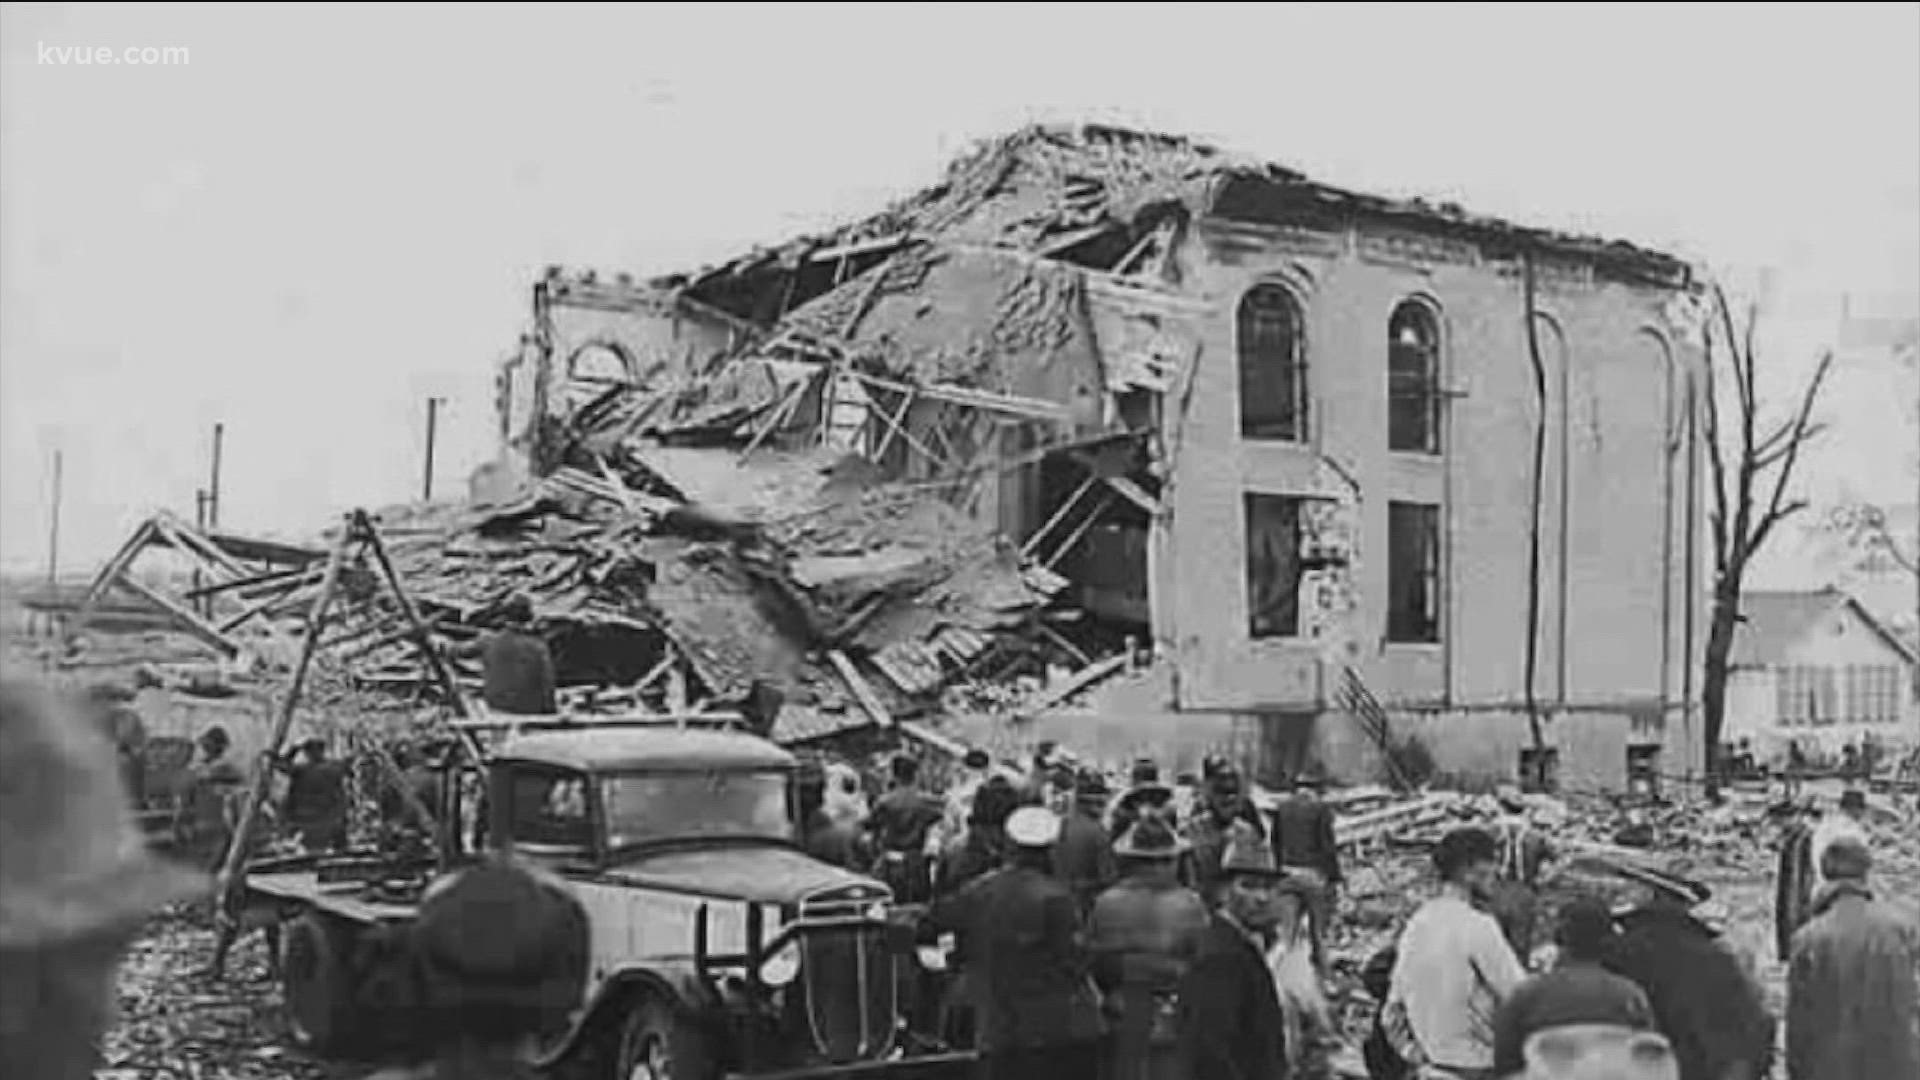 The devastating explosion nearly ended an entire generation in the small town and residents still recall the tragedy to this day.